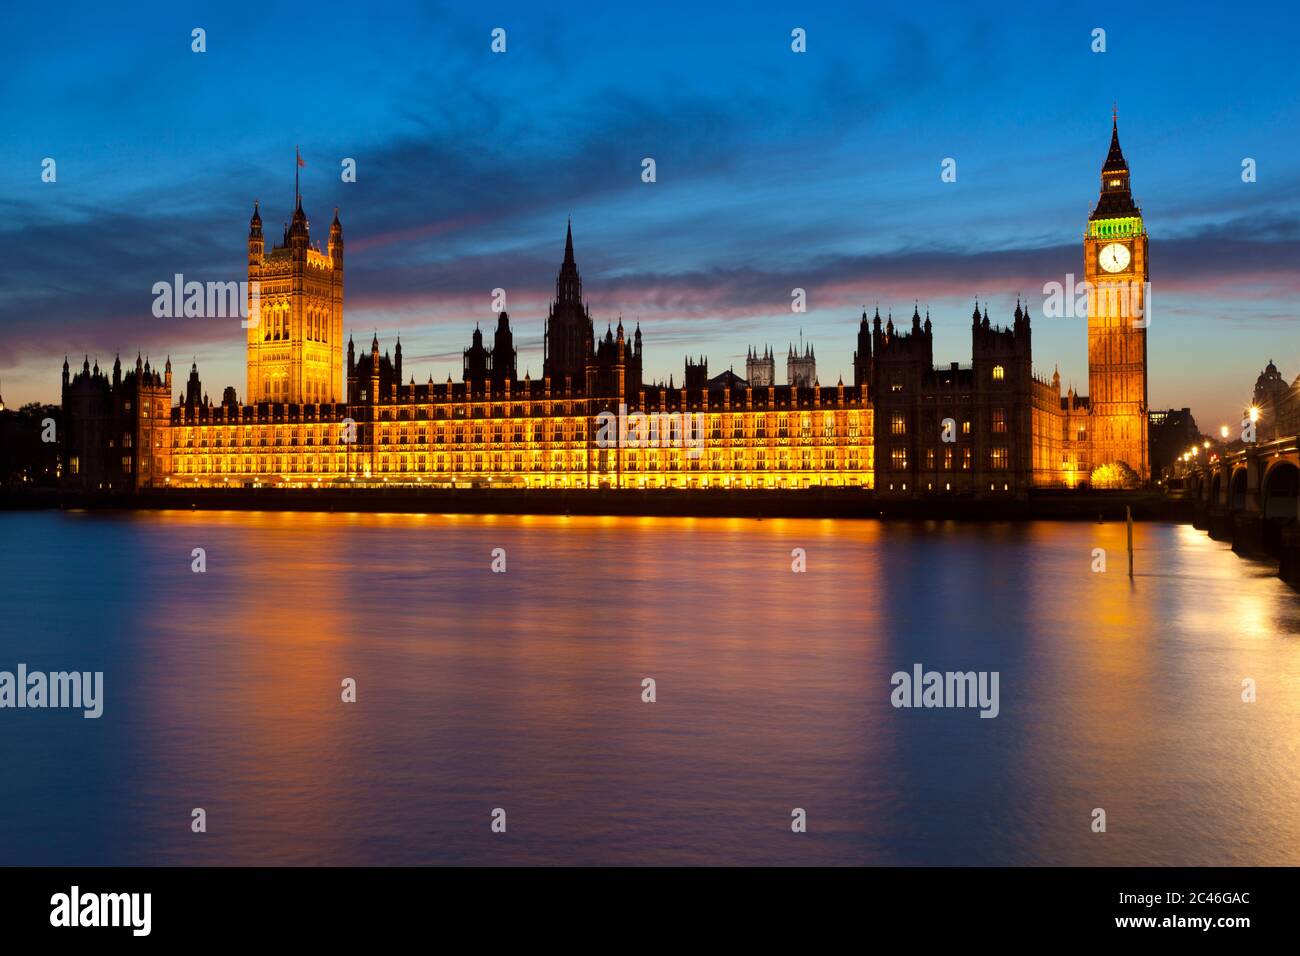 View over River Thames to Houses of Parliament and Big Ben at dusk, London, England, United Kingdom, Europe Stock Photo